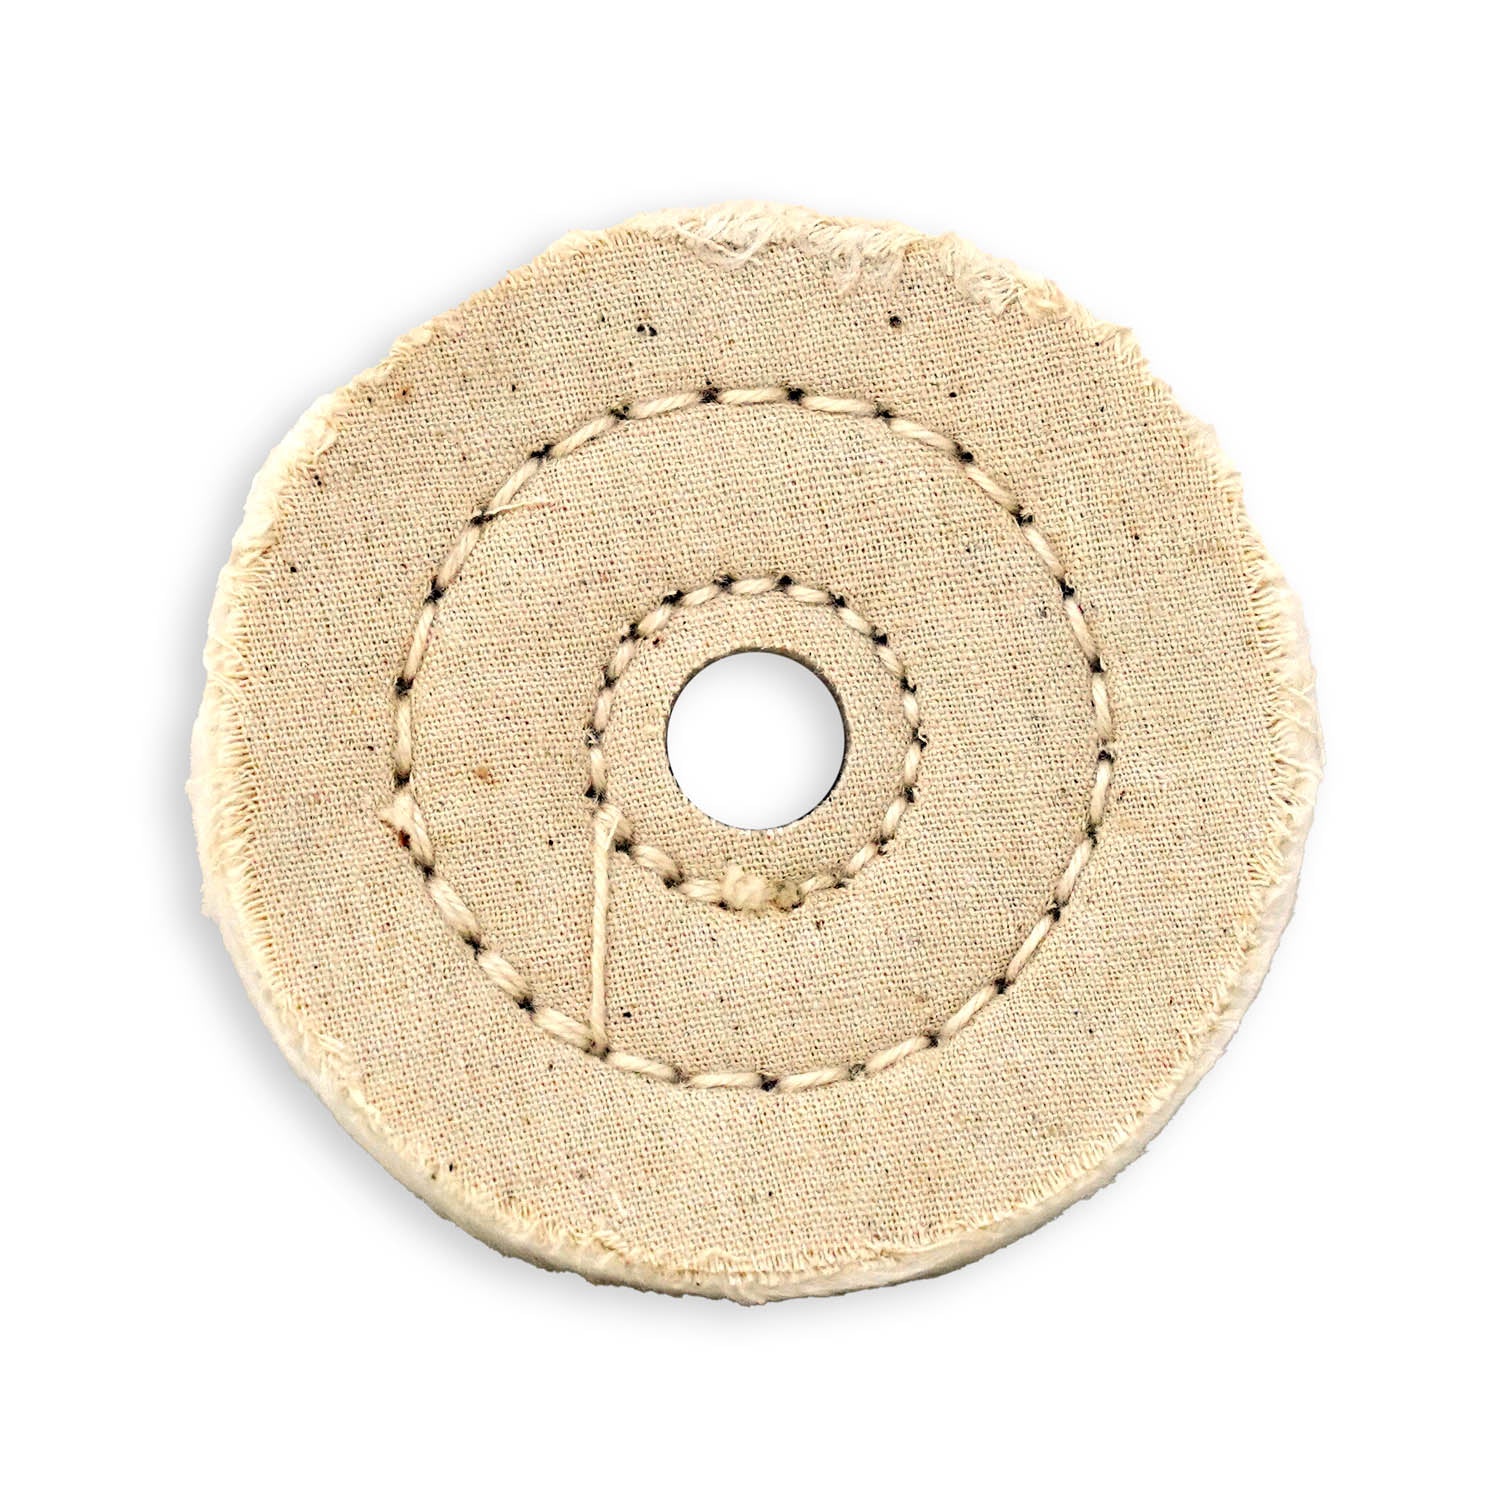 Extra Thick Spiral Sewn Buffing Wheel, Mounted, 3 inch (60 Ply)